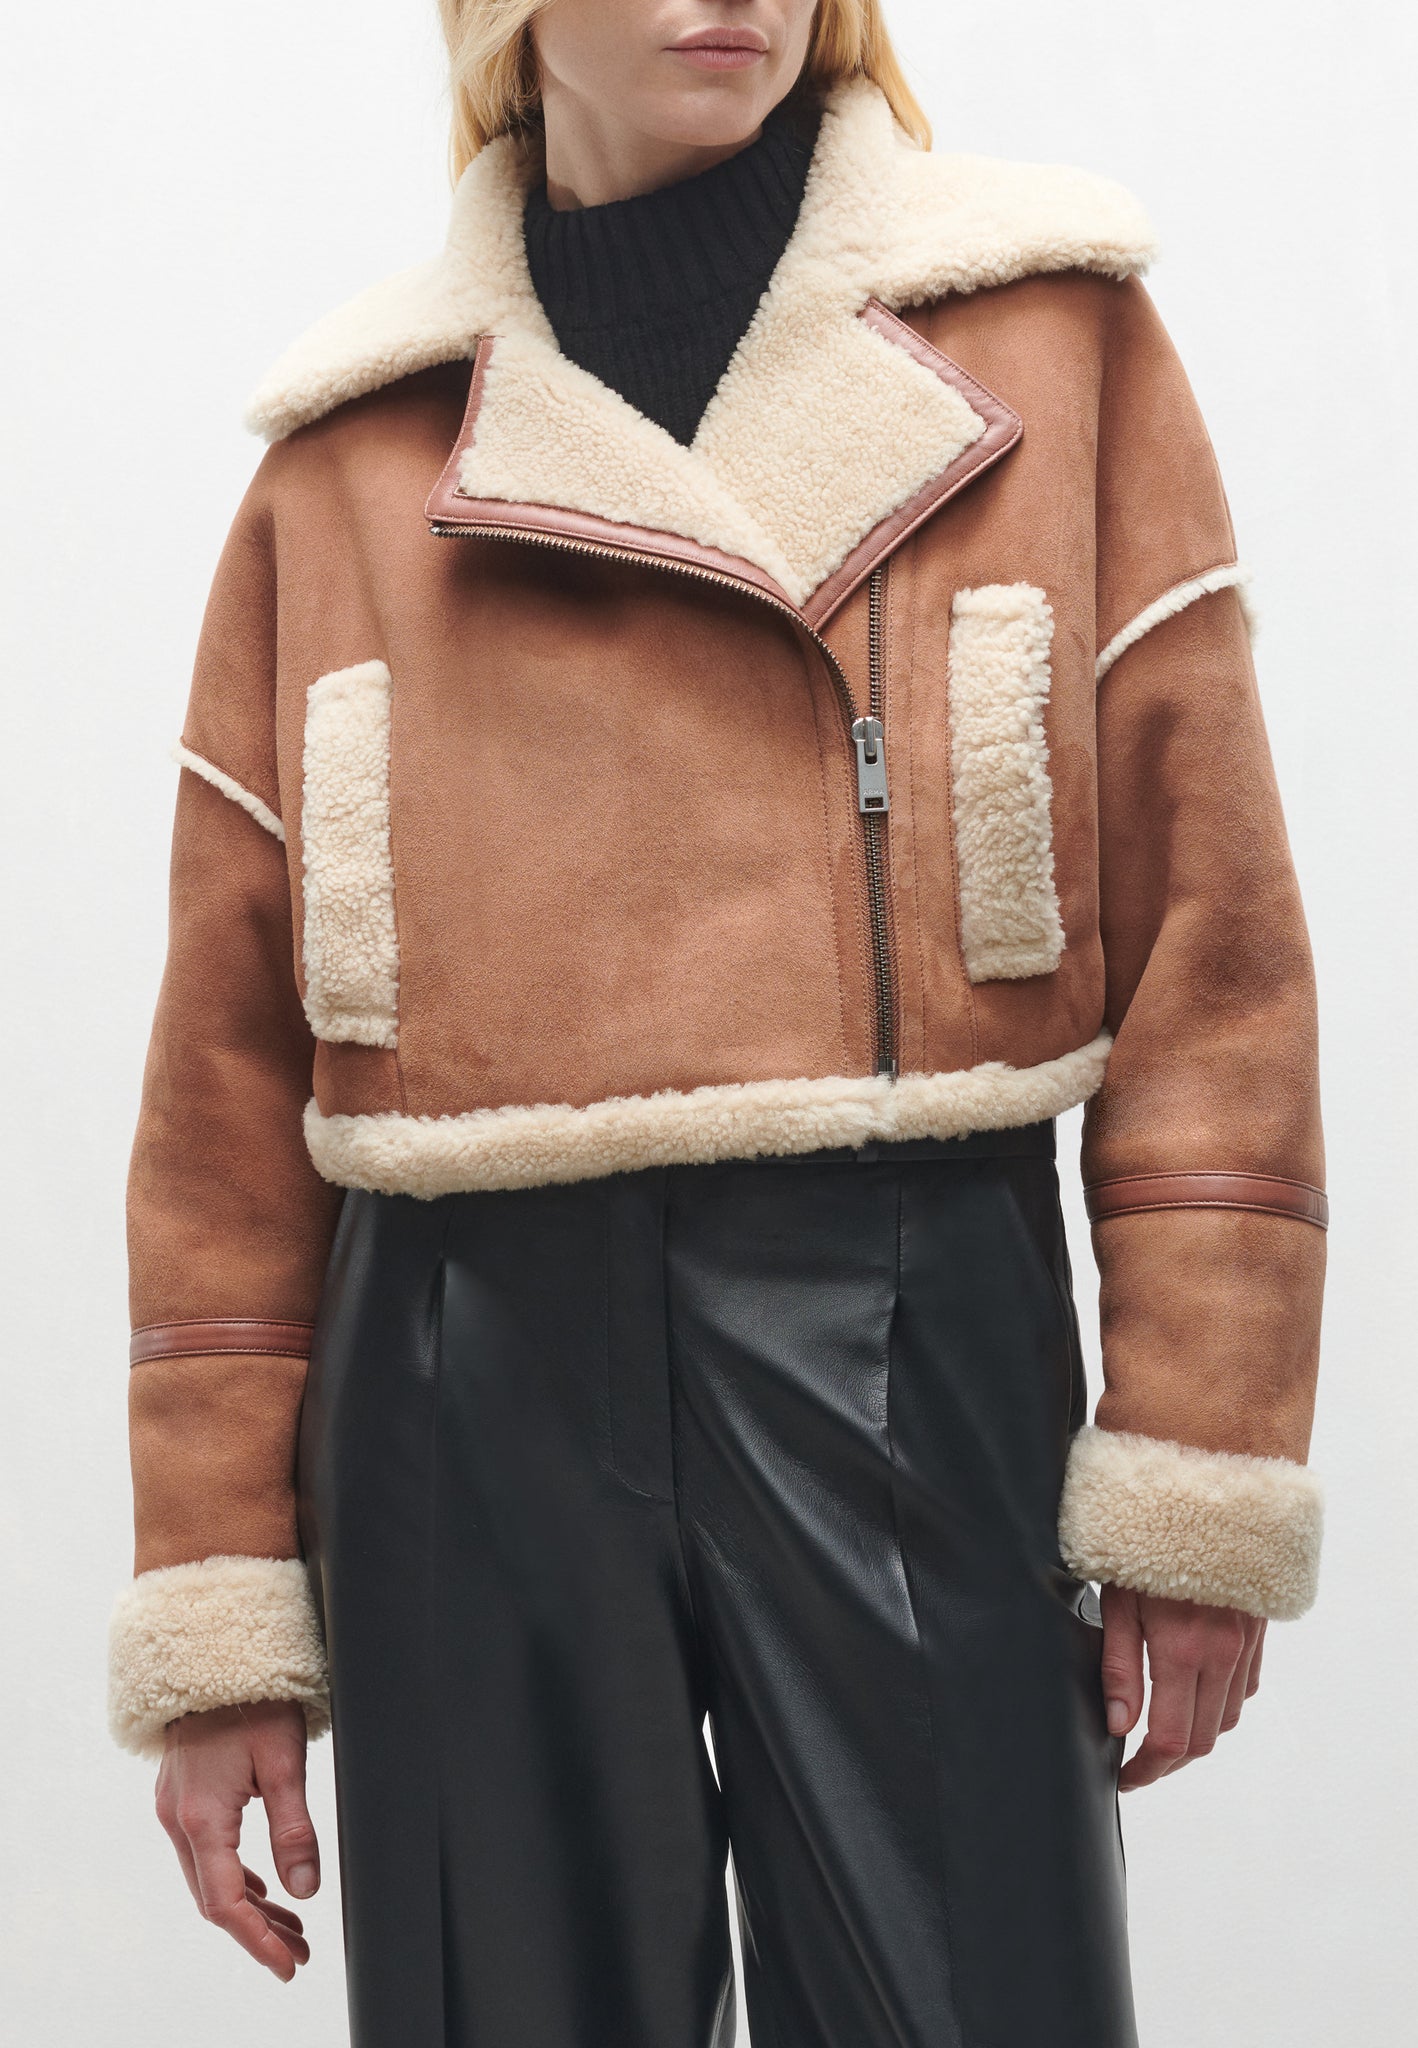 TURIN | Cropped shearling jacket